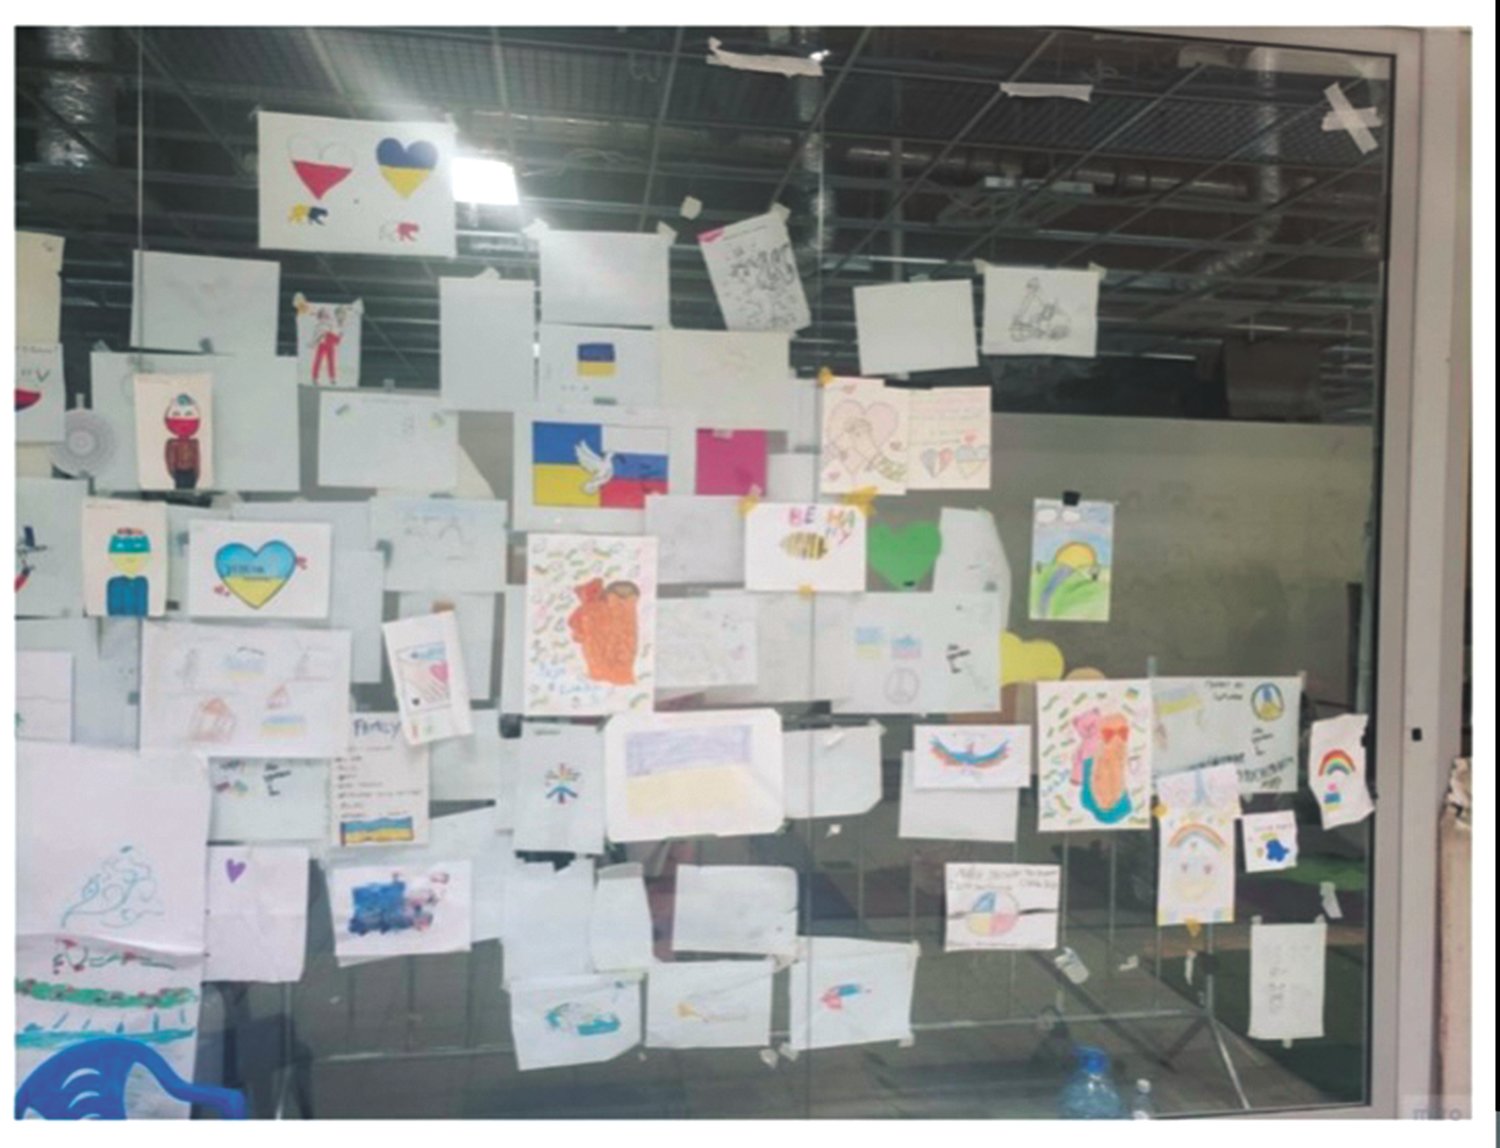 DRAWINGS IN POLAND: As part of the counseling service in Poland, children created drawings which were hung on the wall. Dane saw that many of the drawings had other country’s flags and messages of support but there were very few drawings with a reference to America. (Submitted photo)